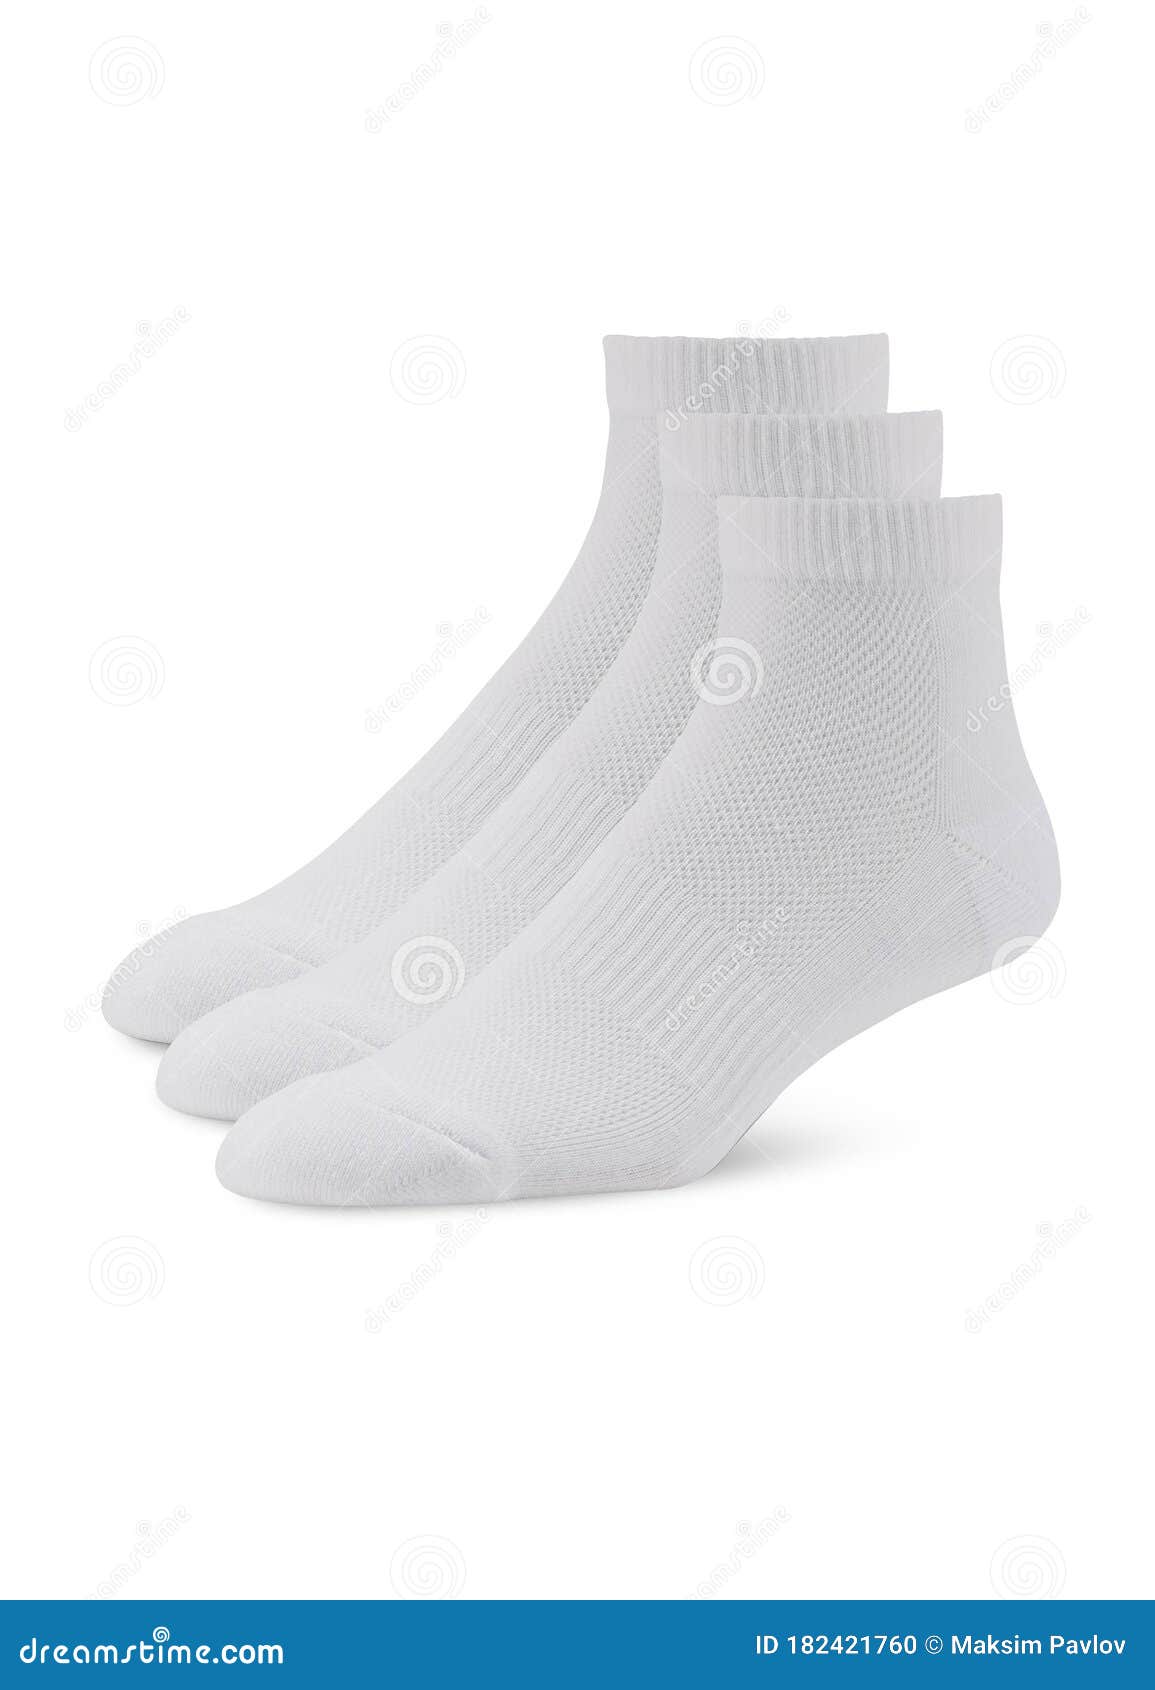 Download Blank White Socks Design Mockup, Isolated, Clipping Path ...